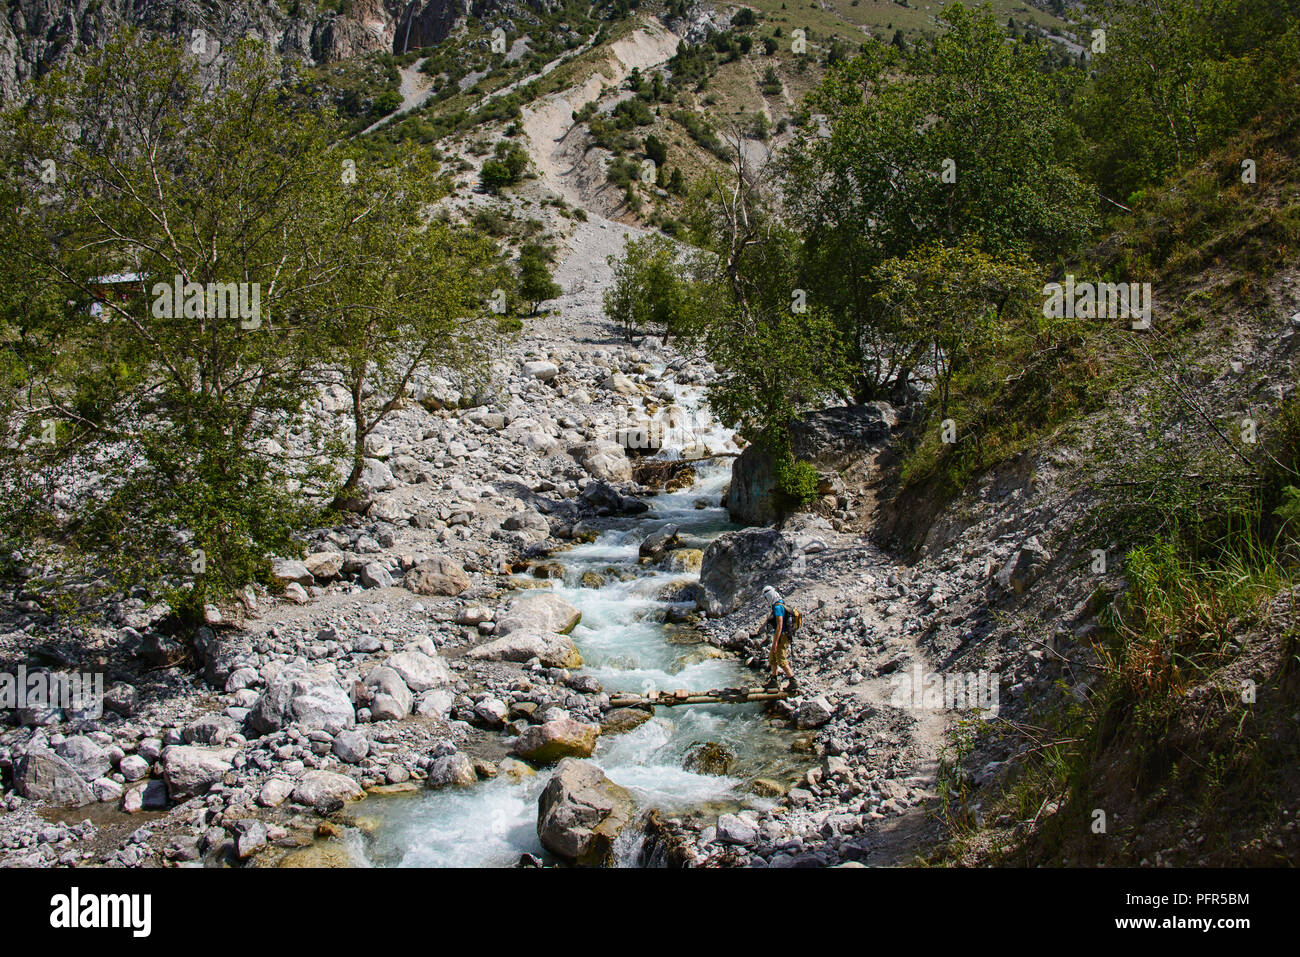 River crossing while trekking from the walnut village of Arslanbob, Kyrgyzstan Stock Photo